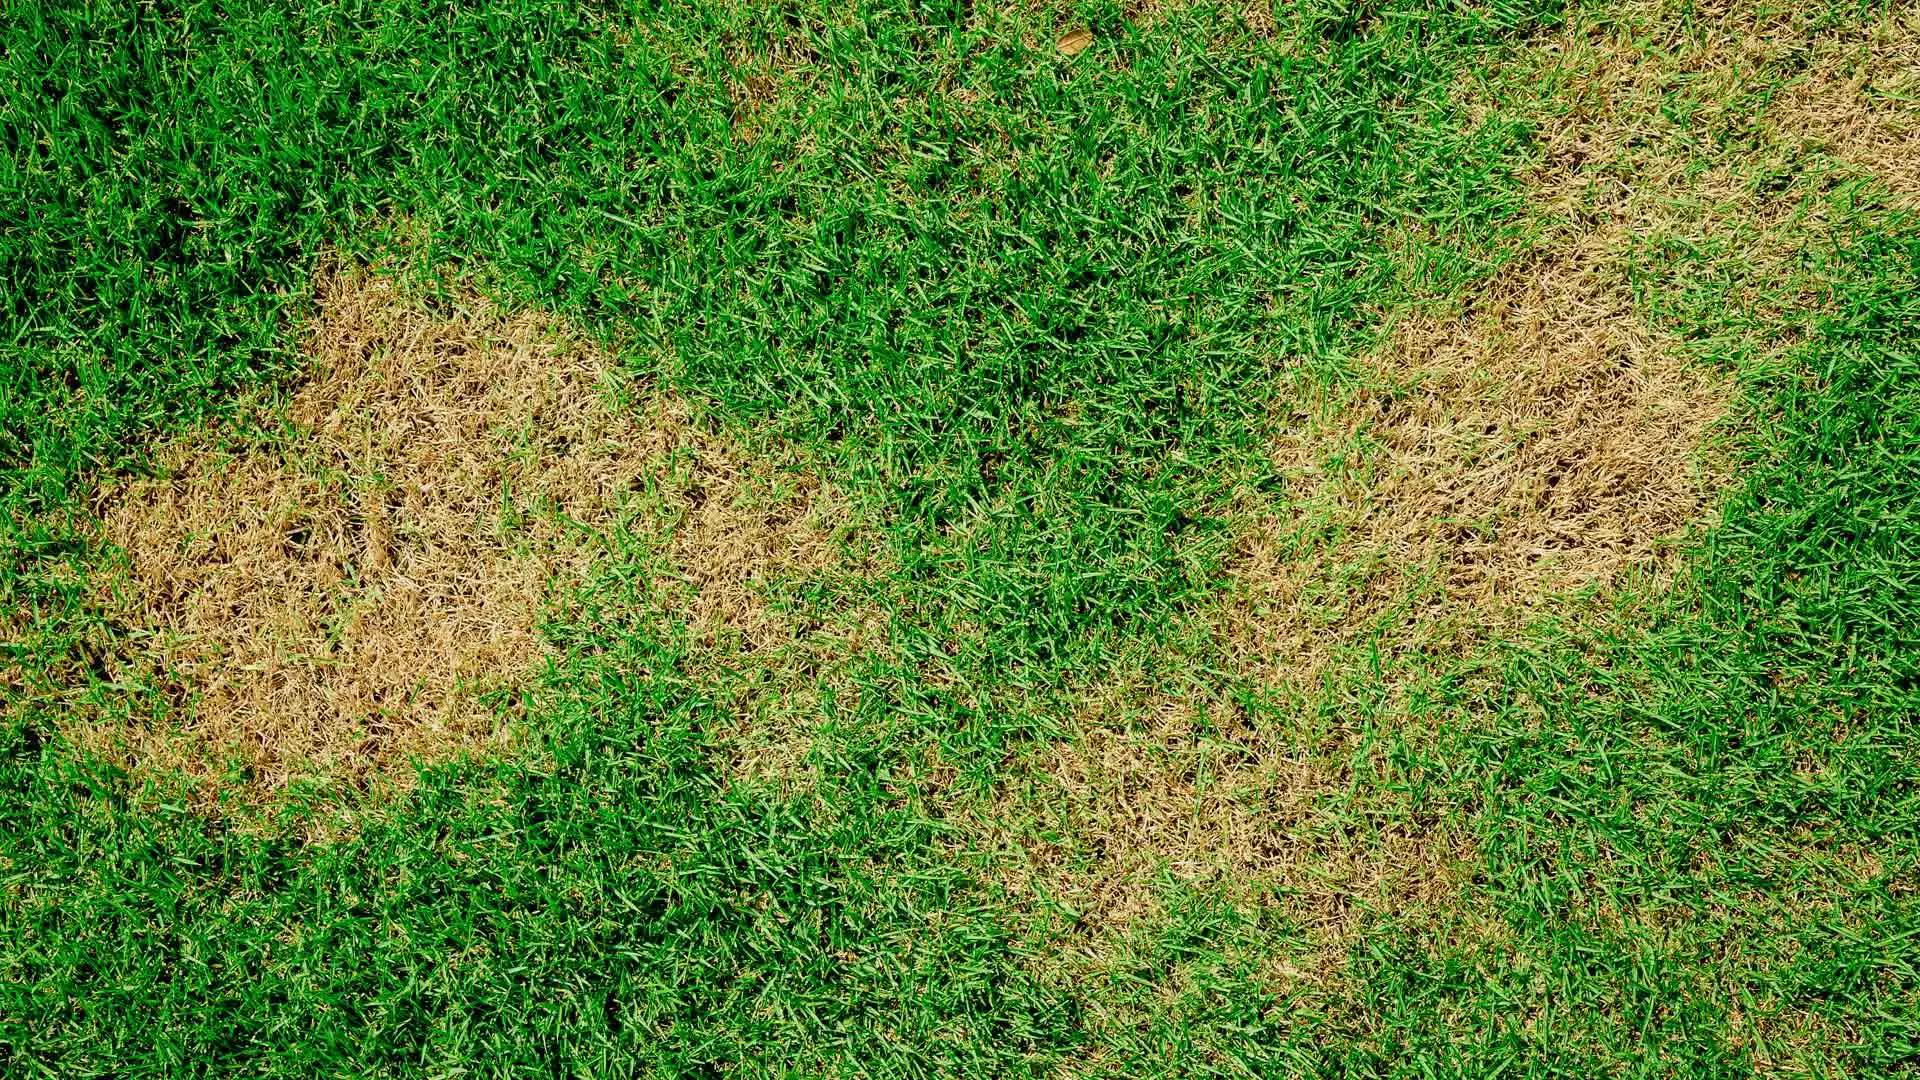 4 Lawn Diseases That Can Invade Lawns in South Dakota